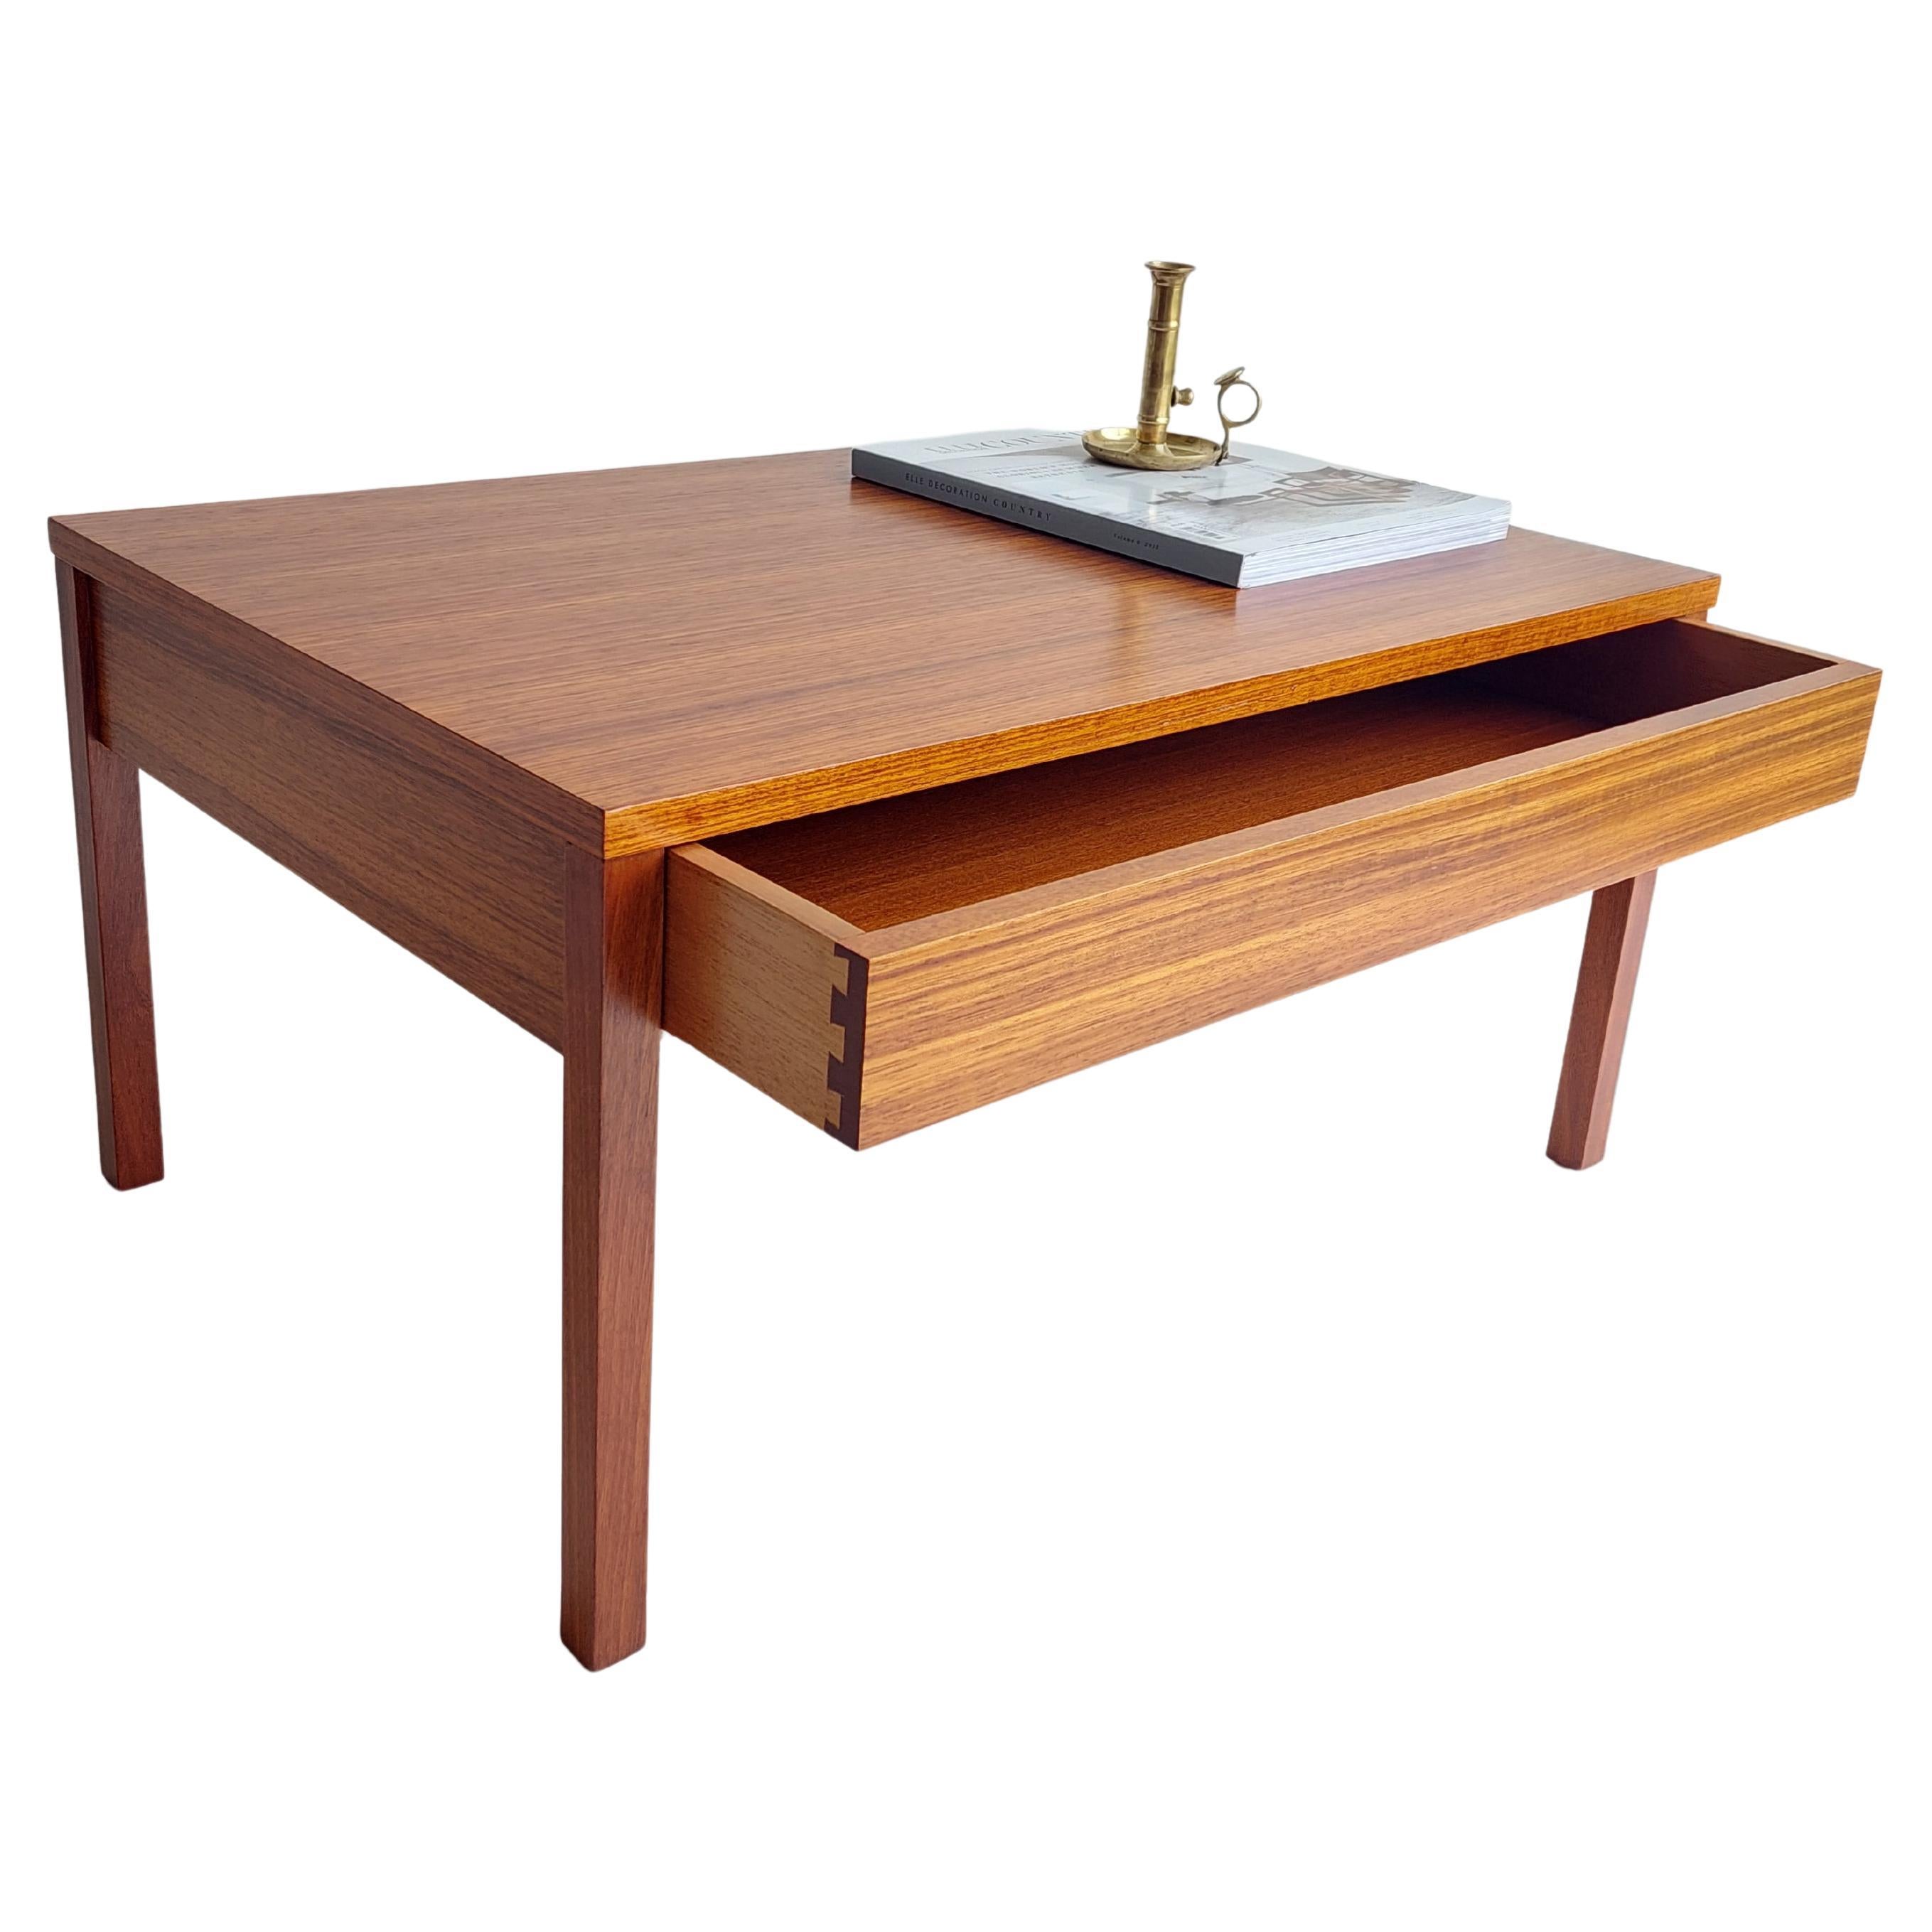 Midcentury 1960s Meredew Teak Side Coffee Table with Drawer/Serving Tray